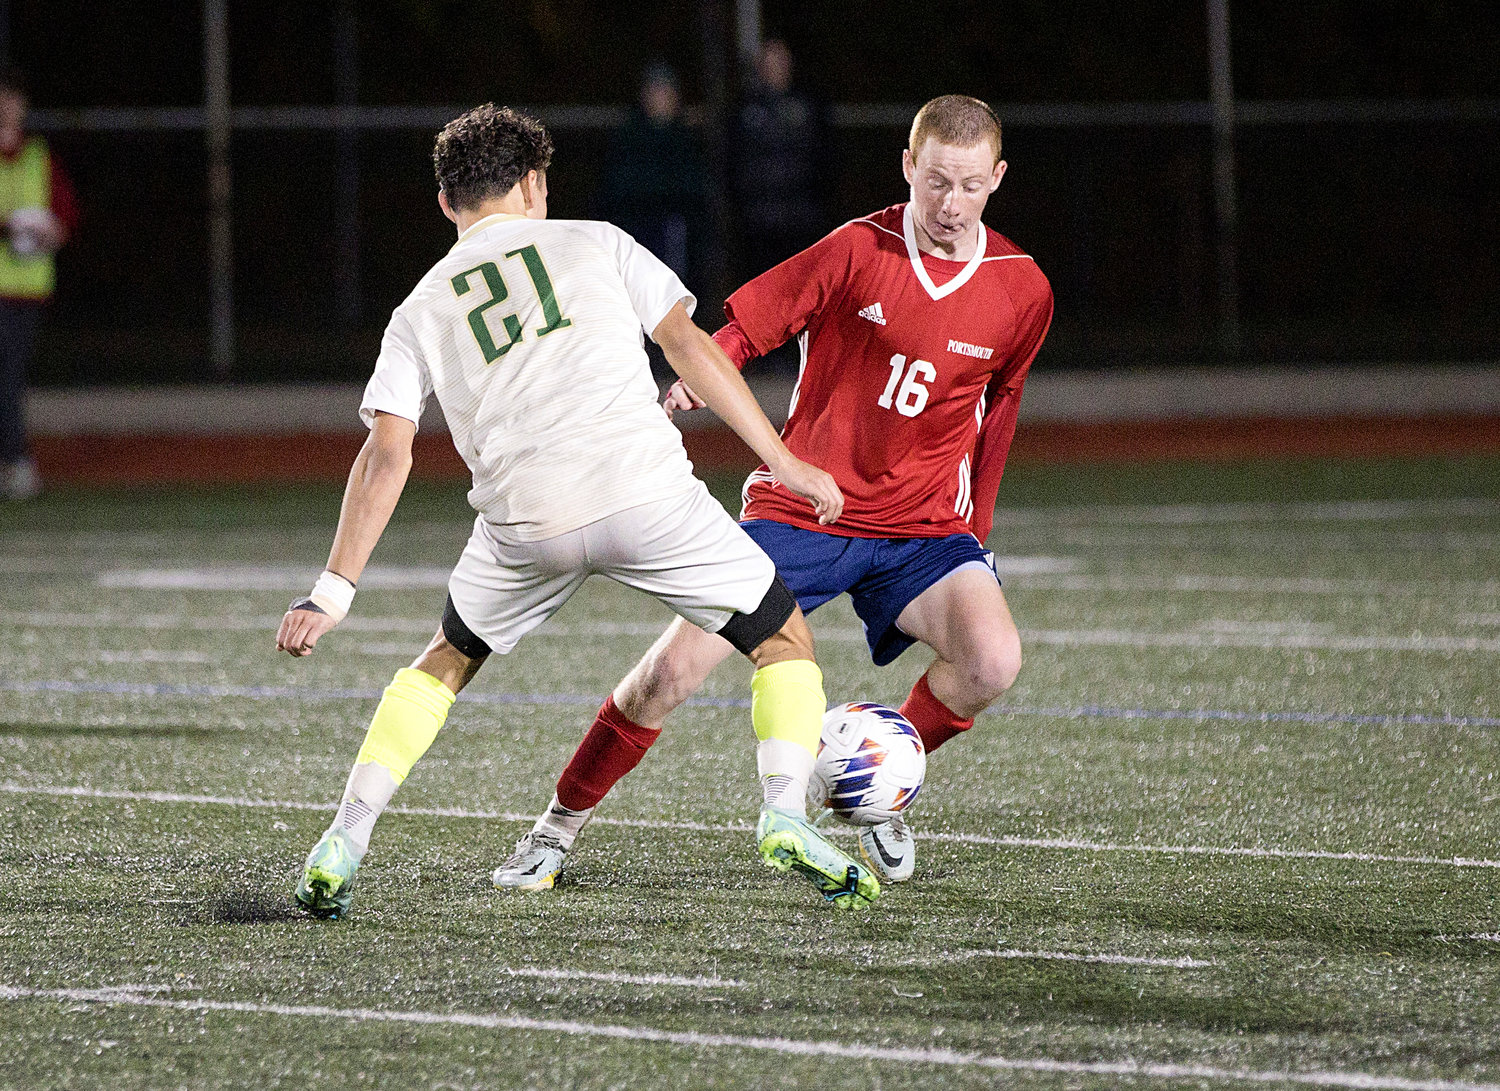 Jacob Rooney battles a Bishop Hendricken opponent for possession of the ball.